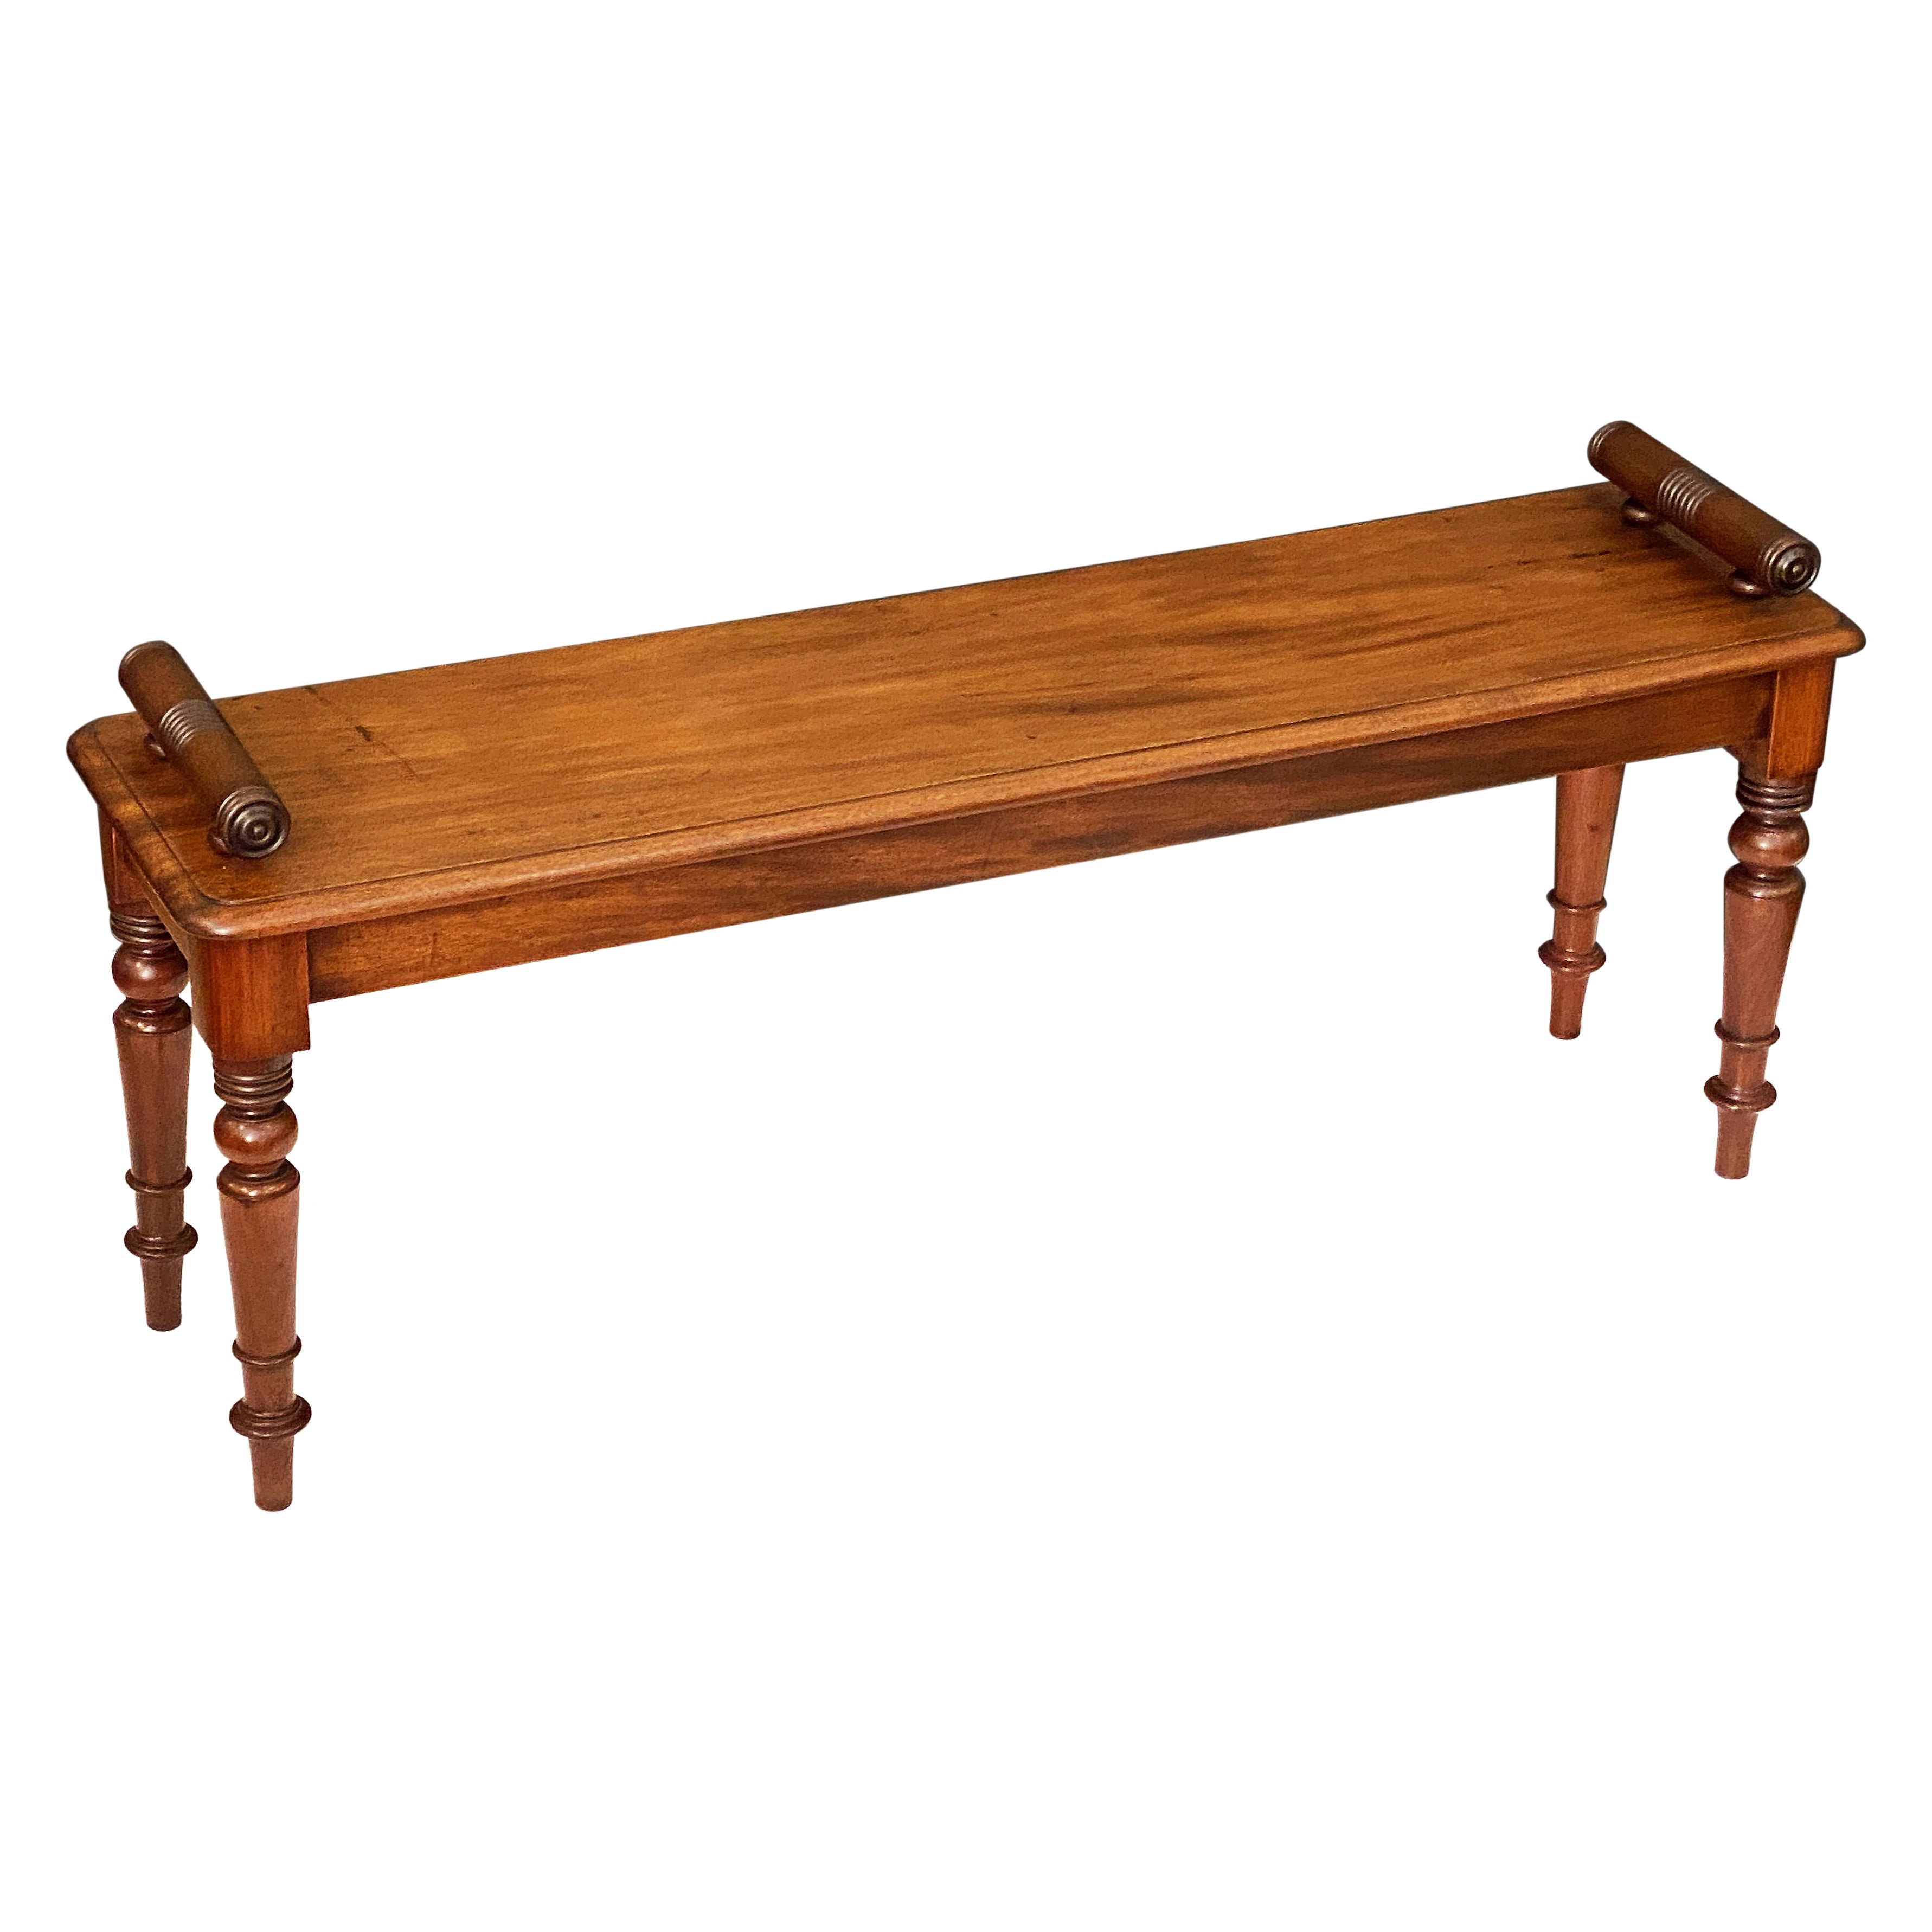 Large English Hall Bench or Window Seat of Mahogany on Turned Legs